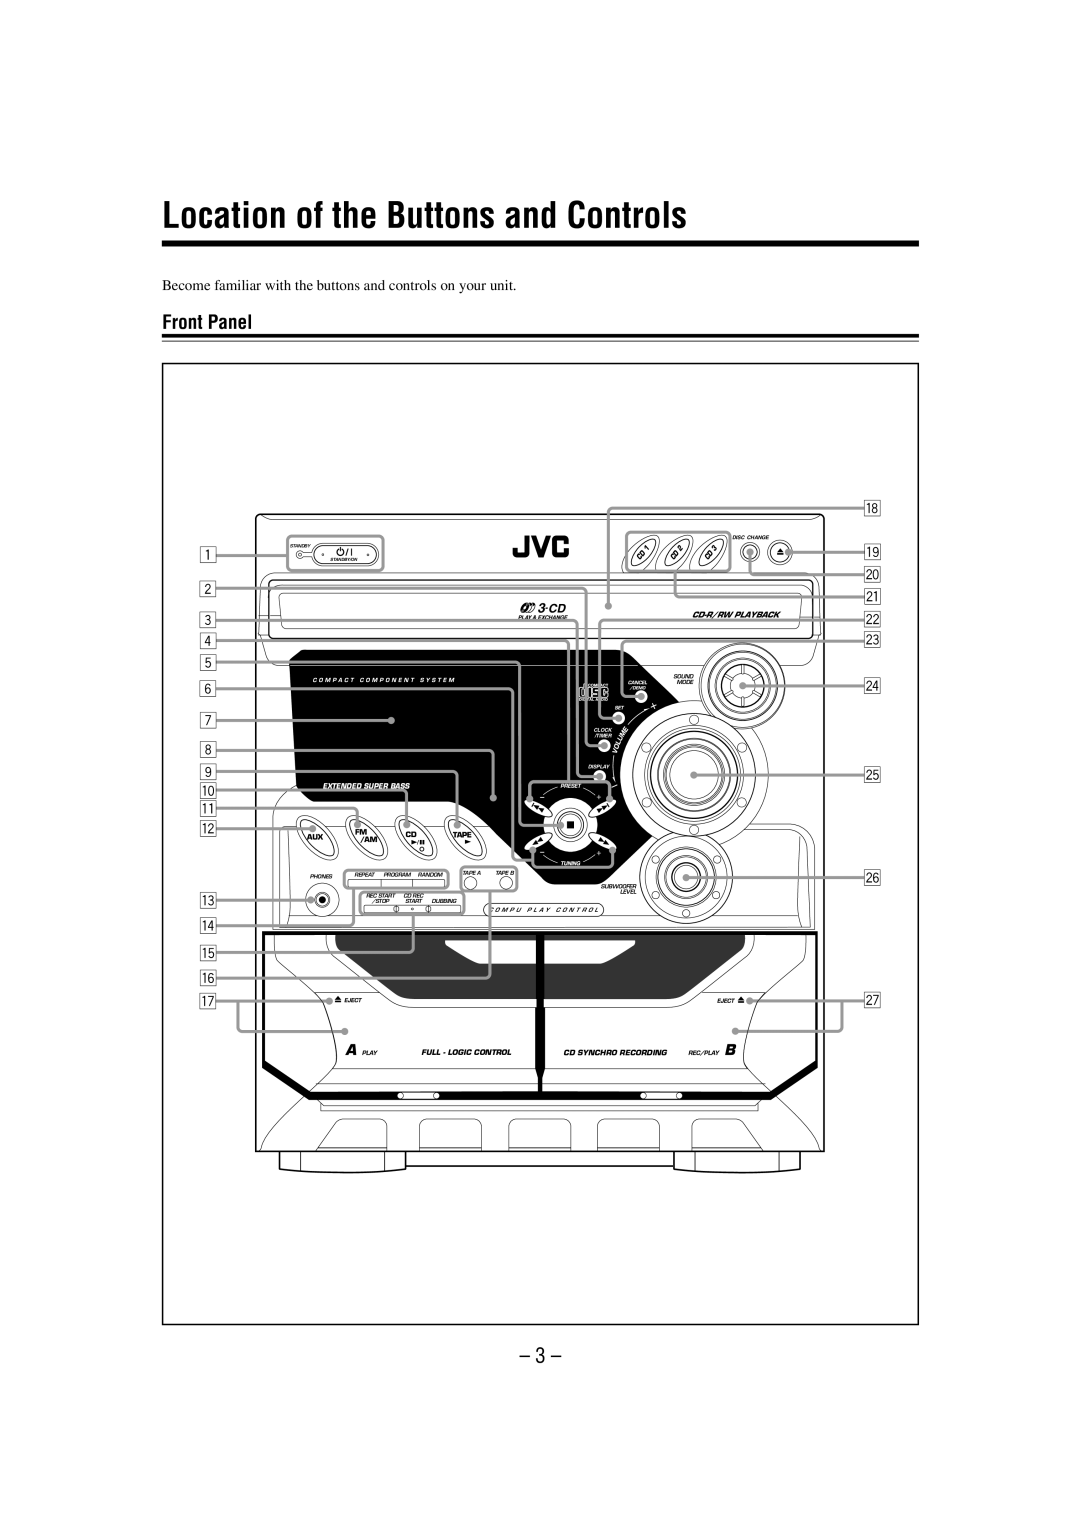 JVC MX-GT700 manual Location of the Buttons and Controls, Front Panel, 3 